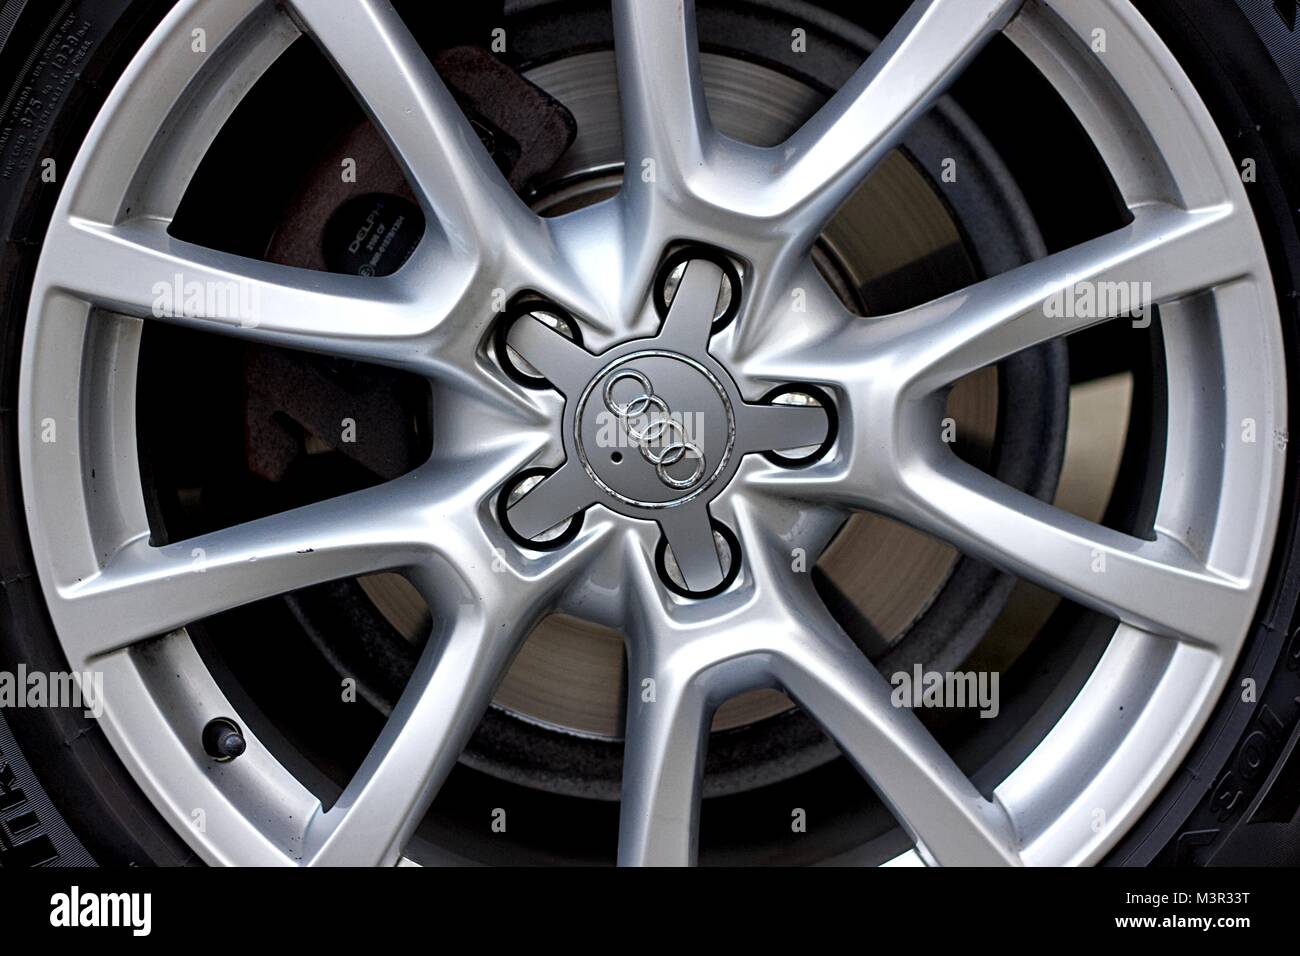 Tire, wheels and brake parts of compact luxury crossover SUV Audi Q5 2.0 TDI quattro S tronic. Stock Photo